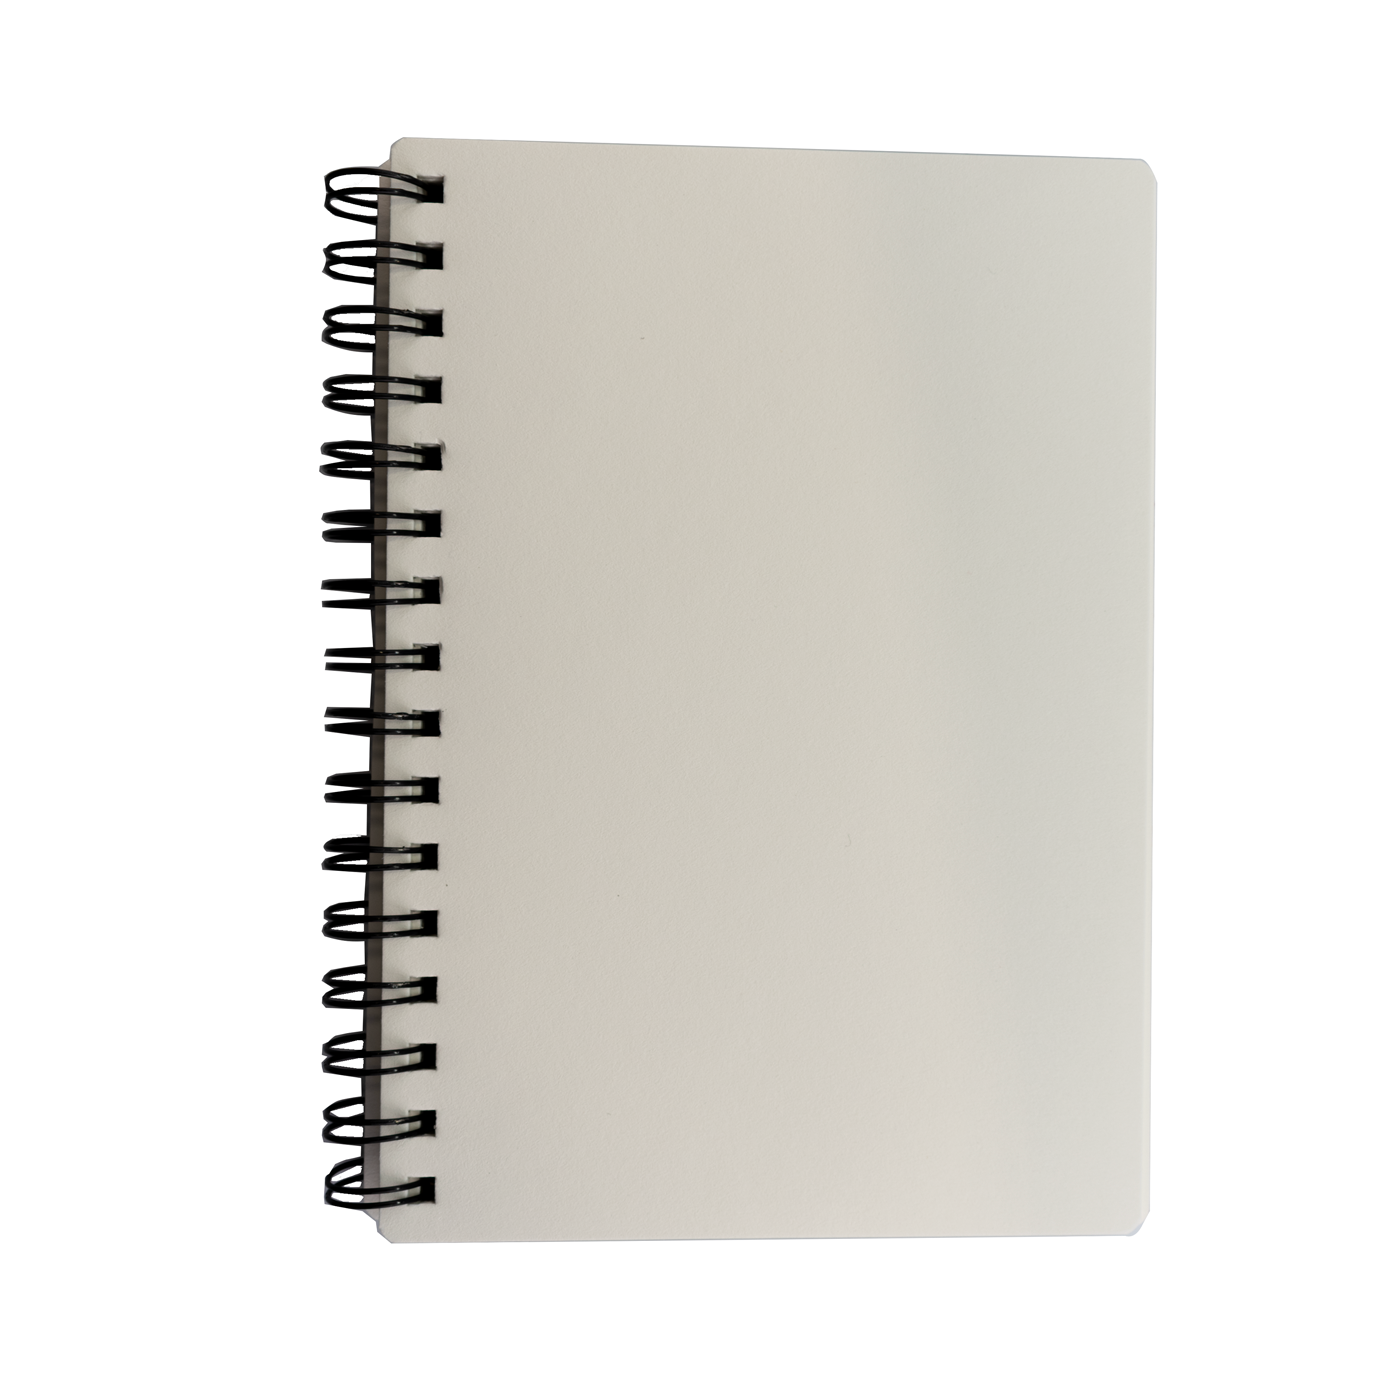 A5 Ring Binder Business Organizer Diary